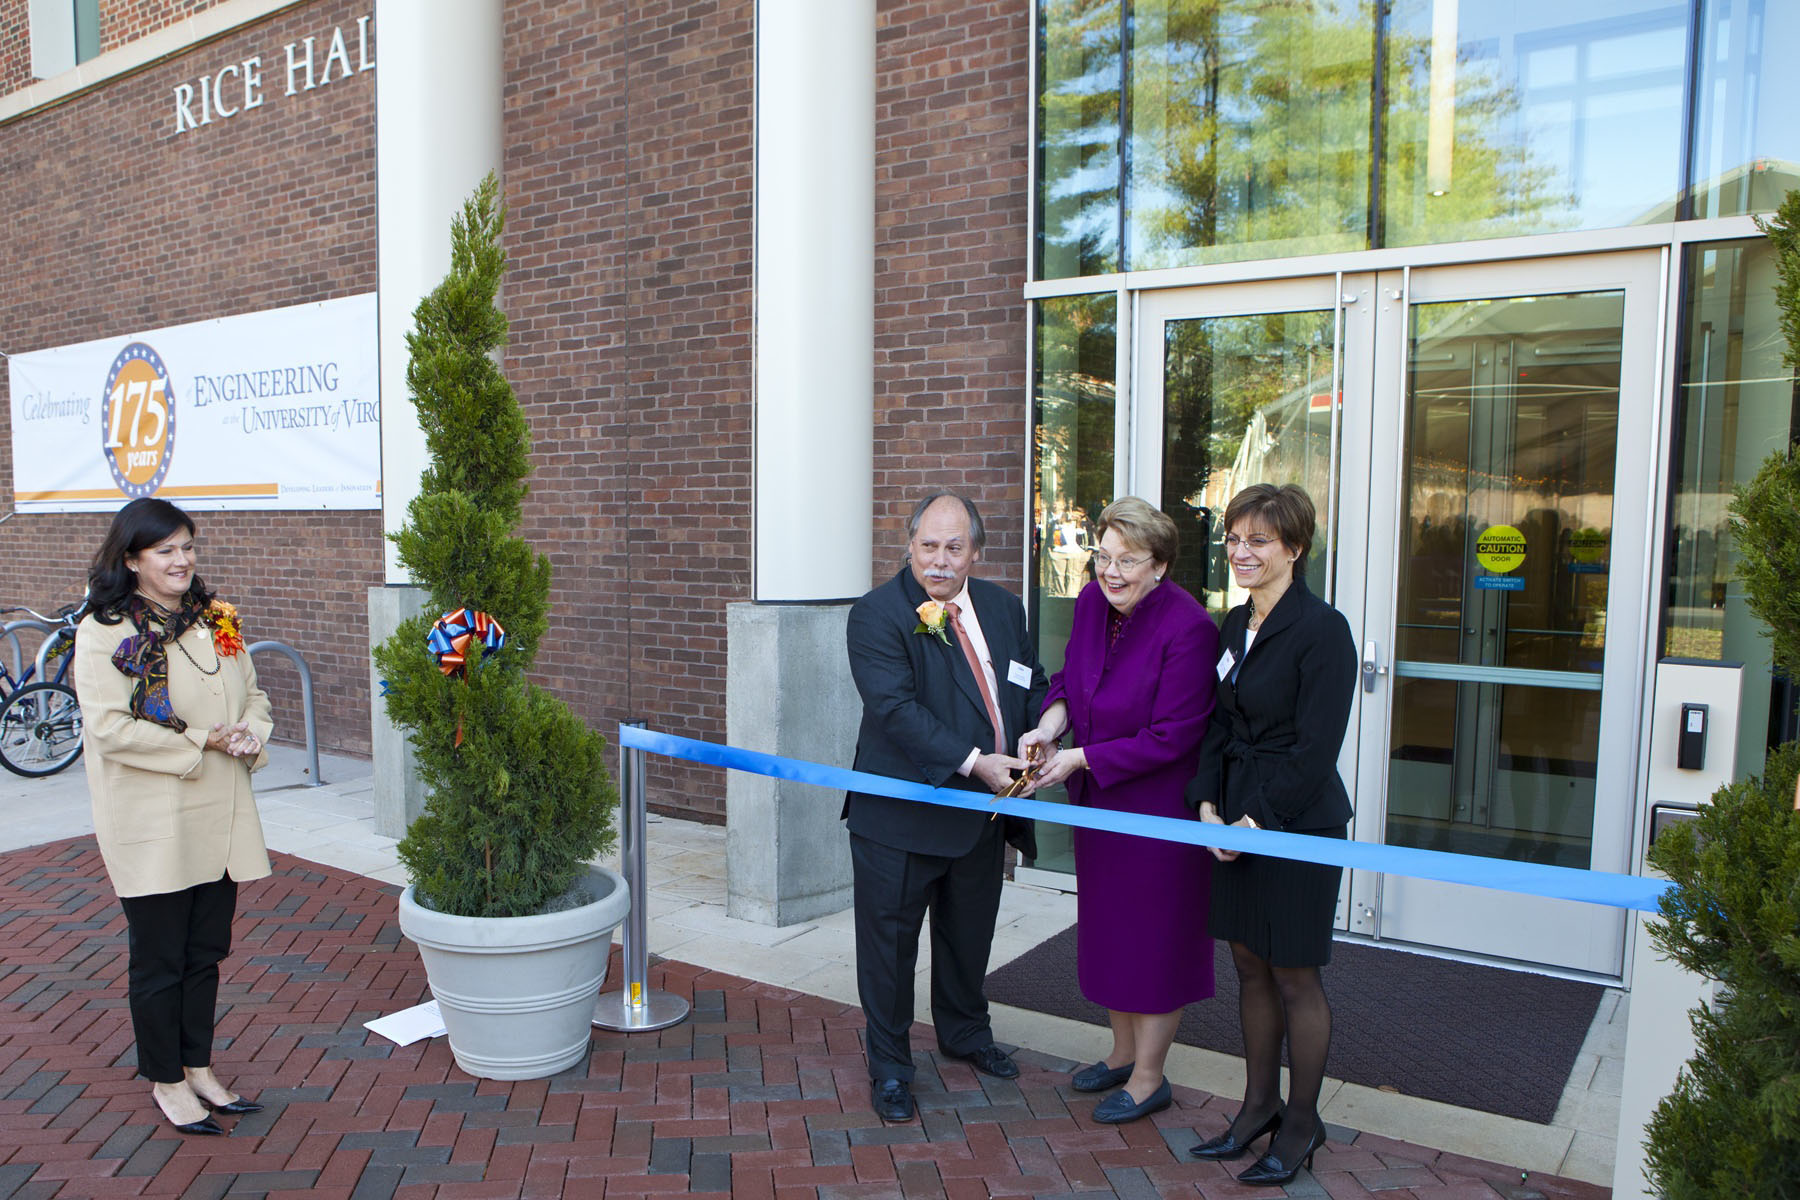 Paul Rice, U.Va. President Teresa A. Sullivan and Rector Helen E. Dragas cutting a ribbon in front of Rice Hall